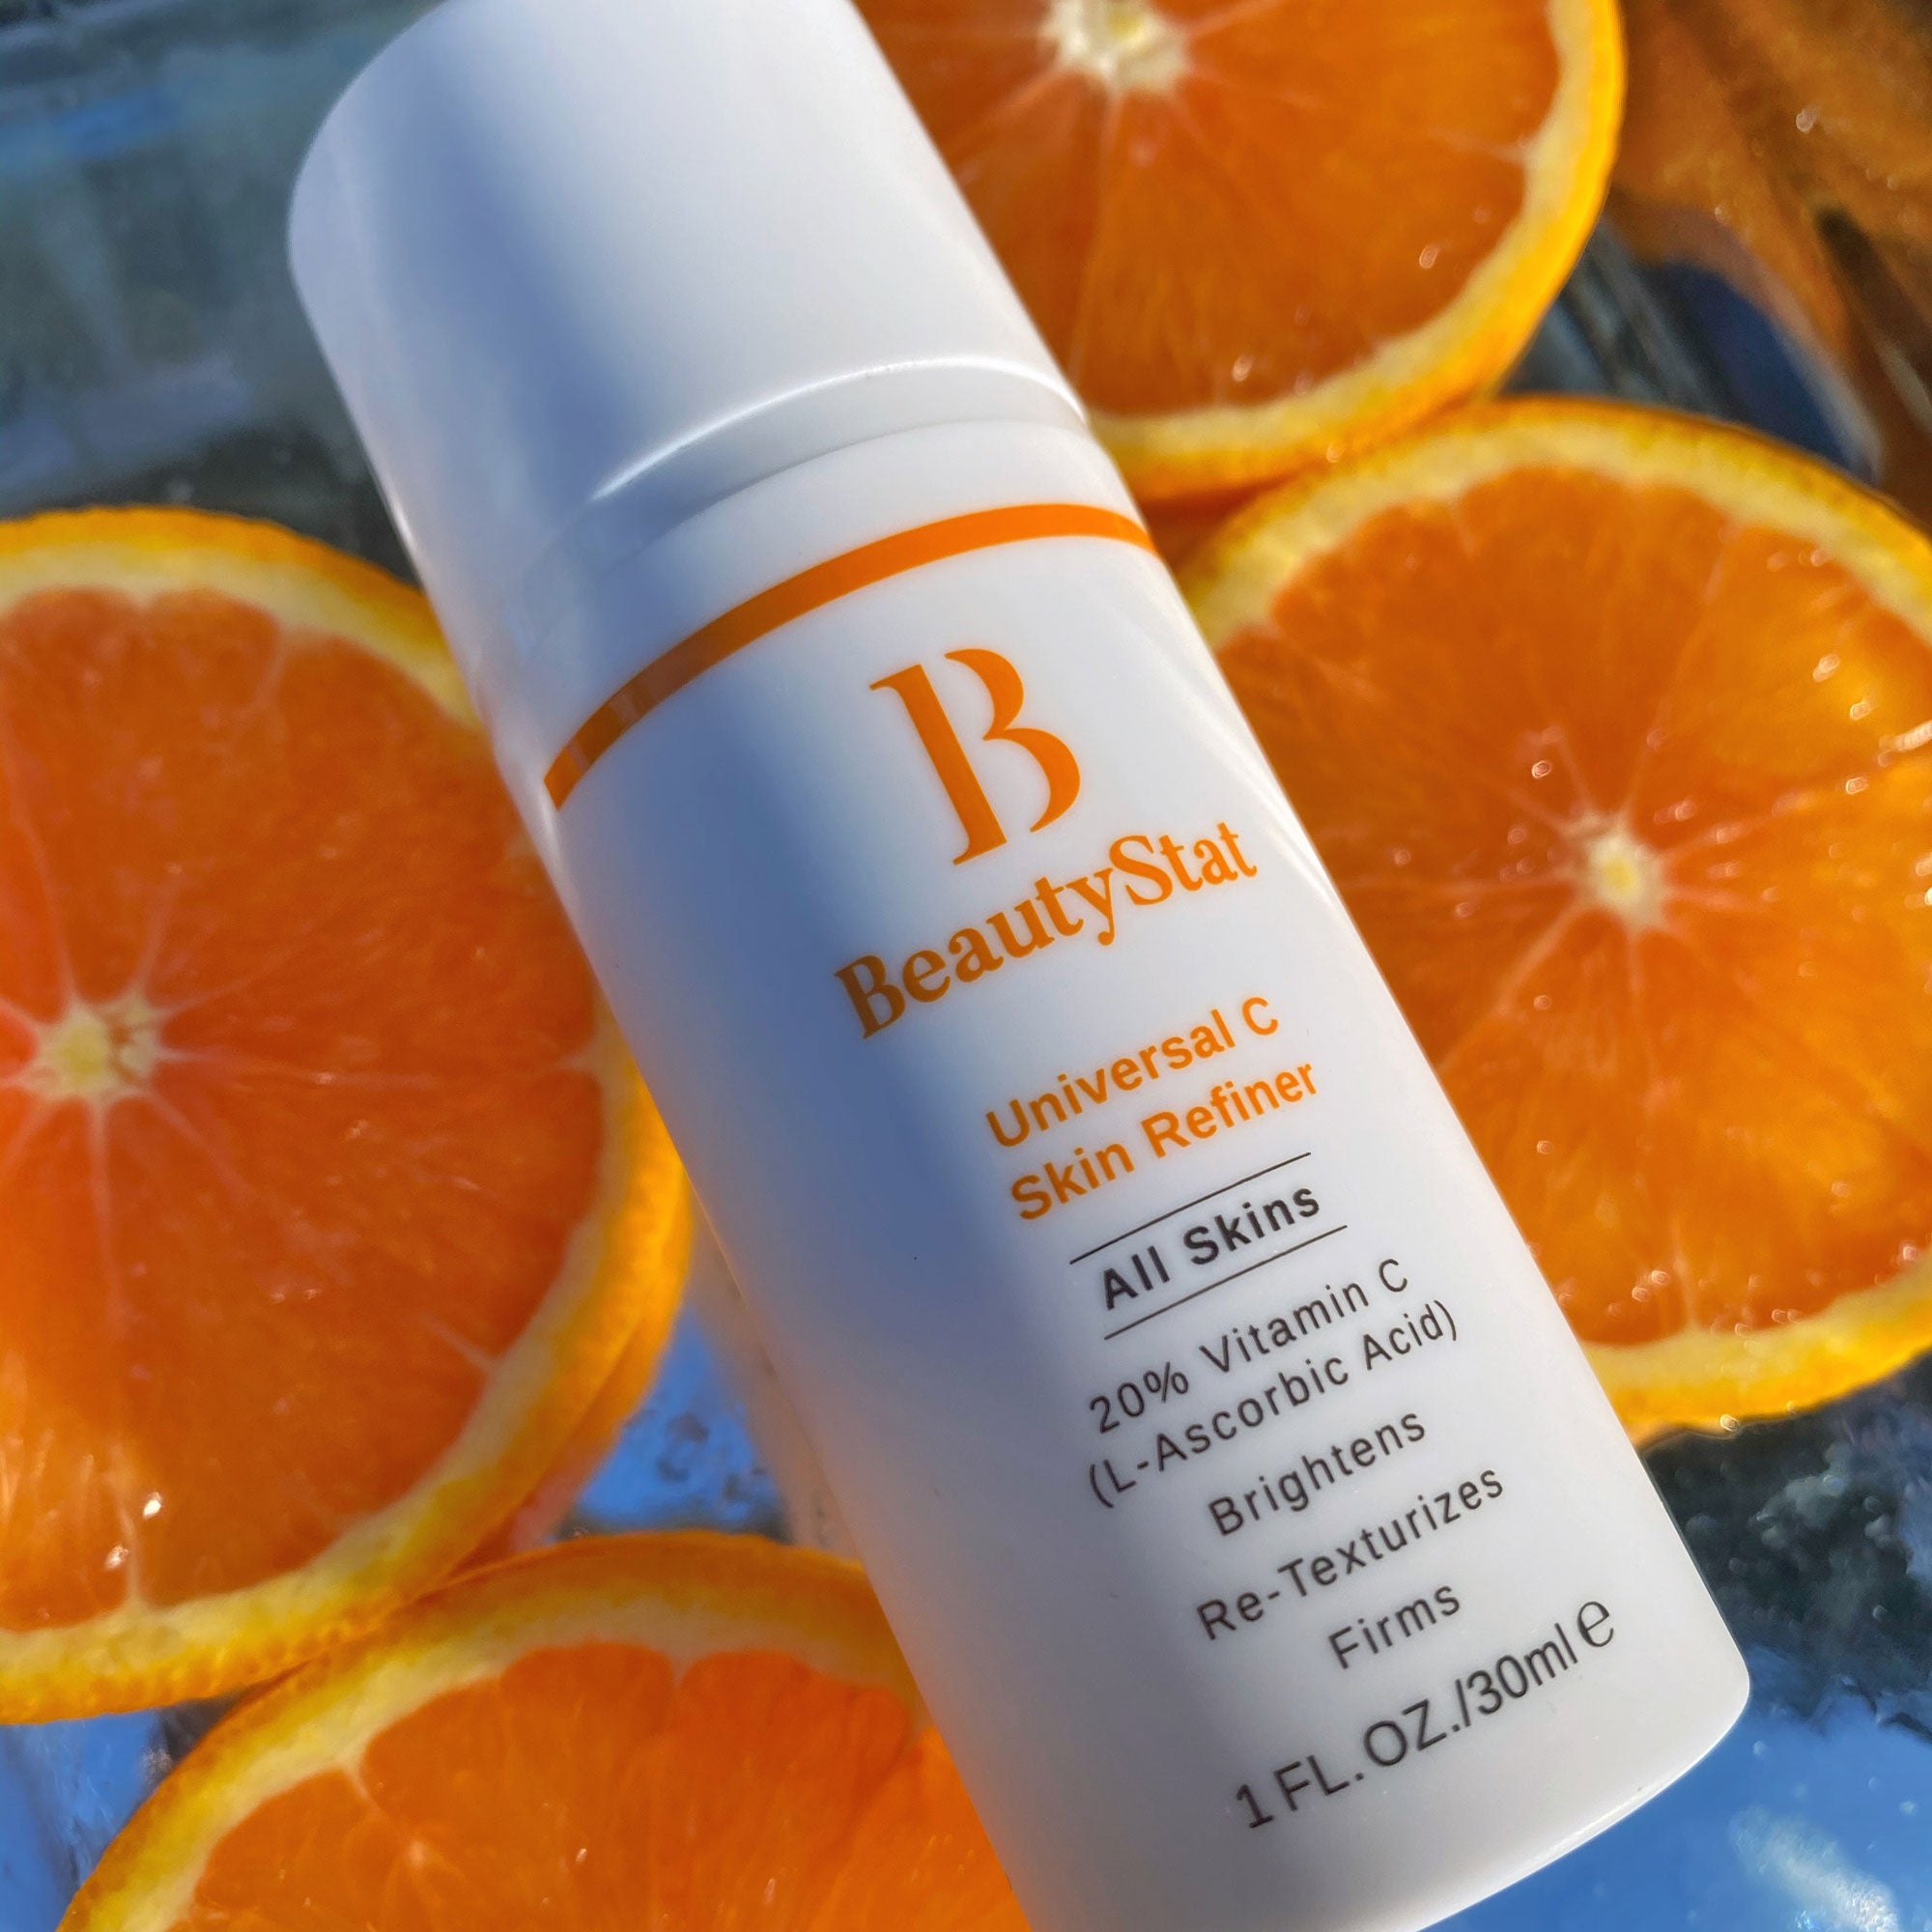 Vitamin C and Retinol - Their Benefits and How to use Them